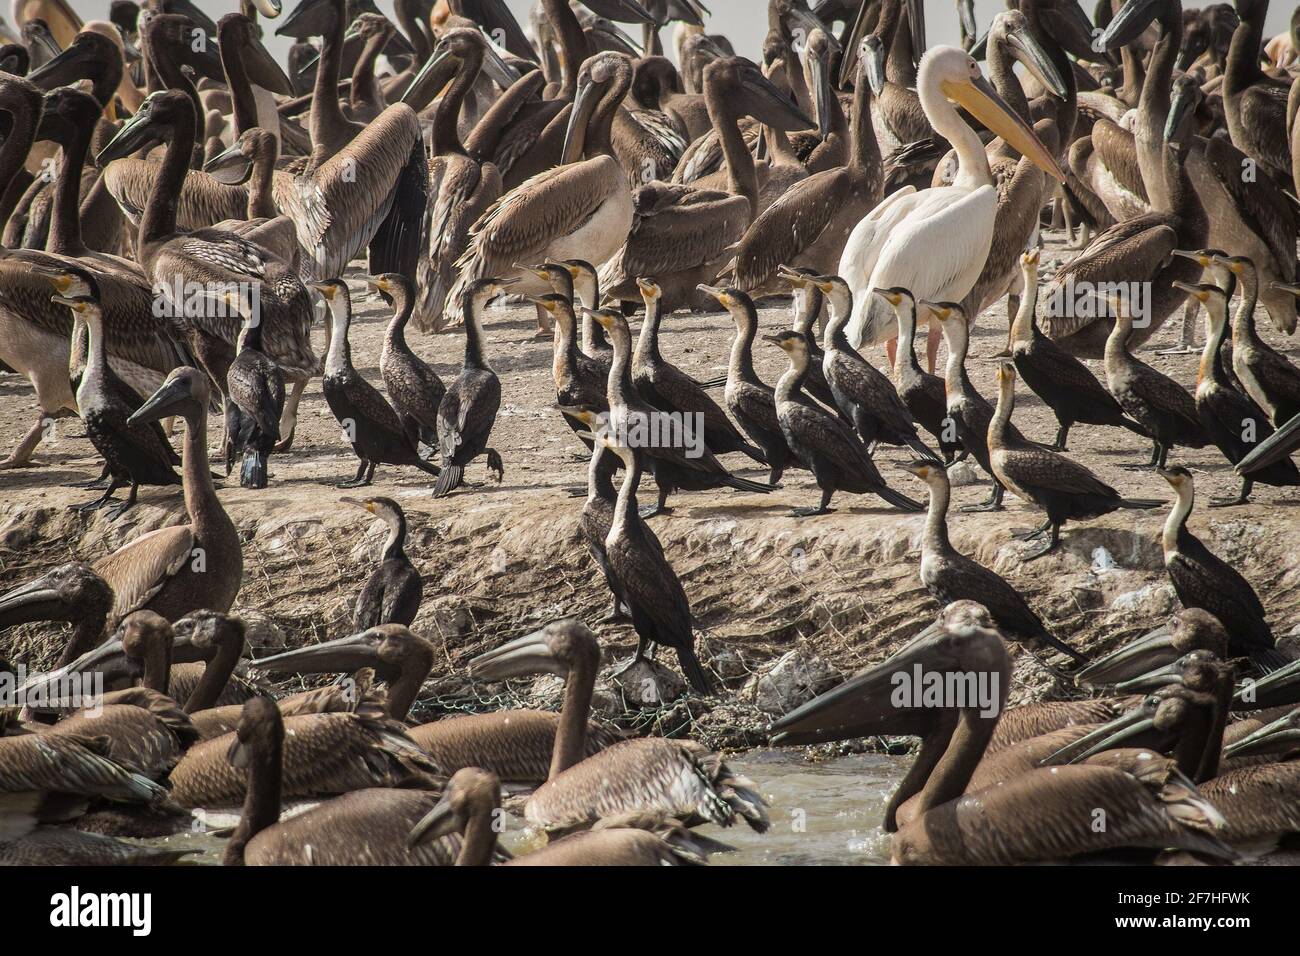 A group of young, small and dark pelican chicks surrounded by grown ups on the national park of Djoudj in Senegal, Africa. Stock Photo